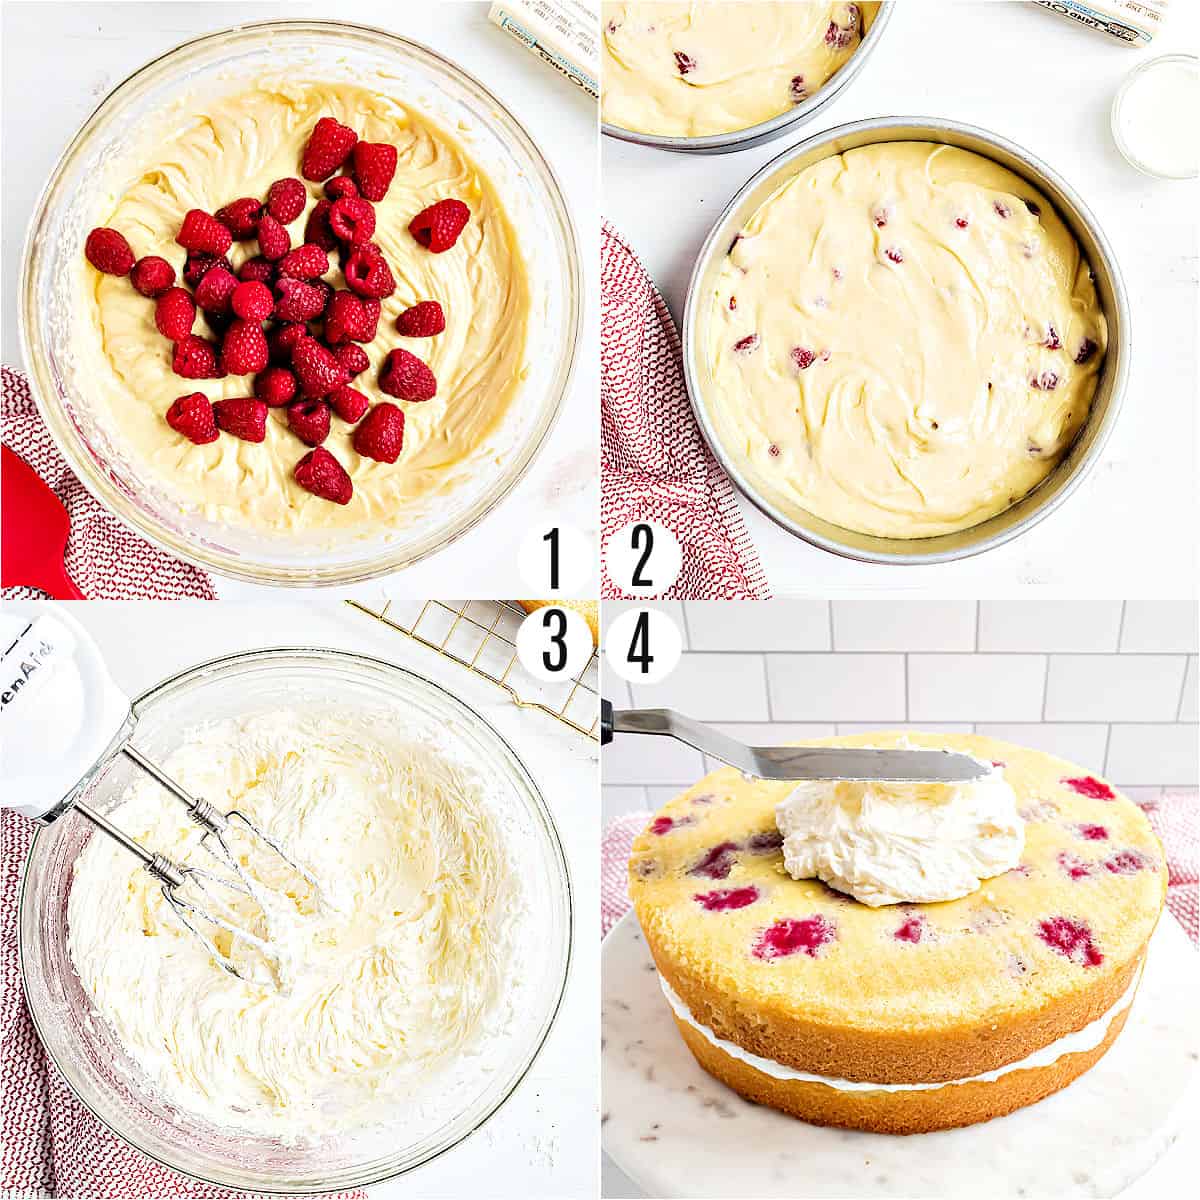 Step by step photos showing how to make raspberry lemon cake.